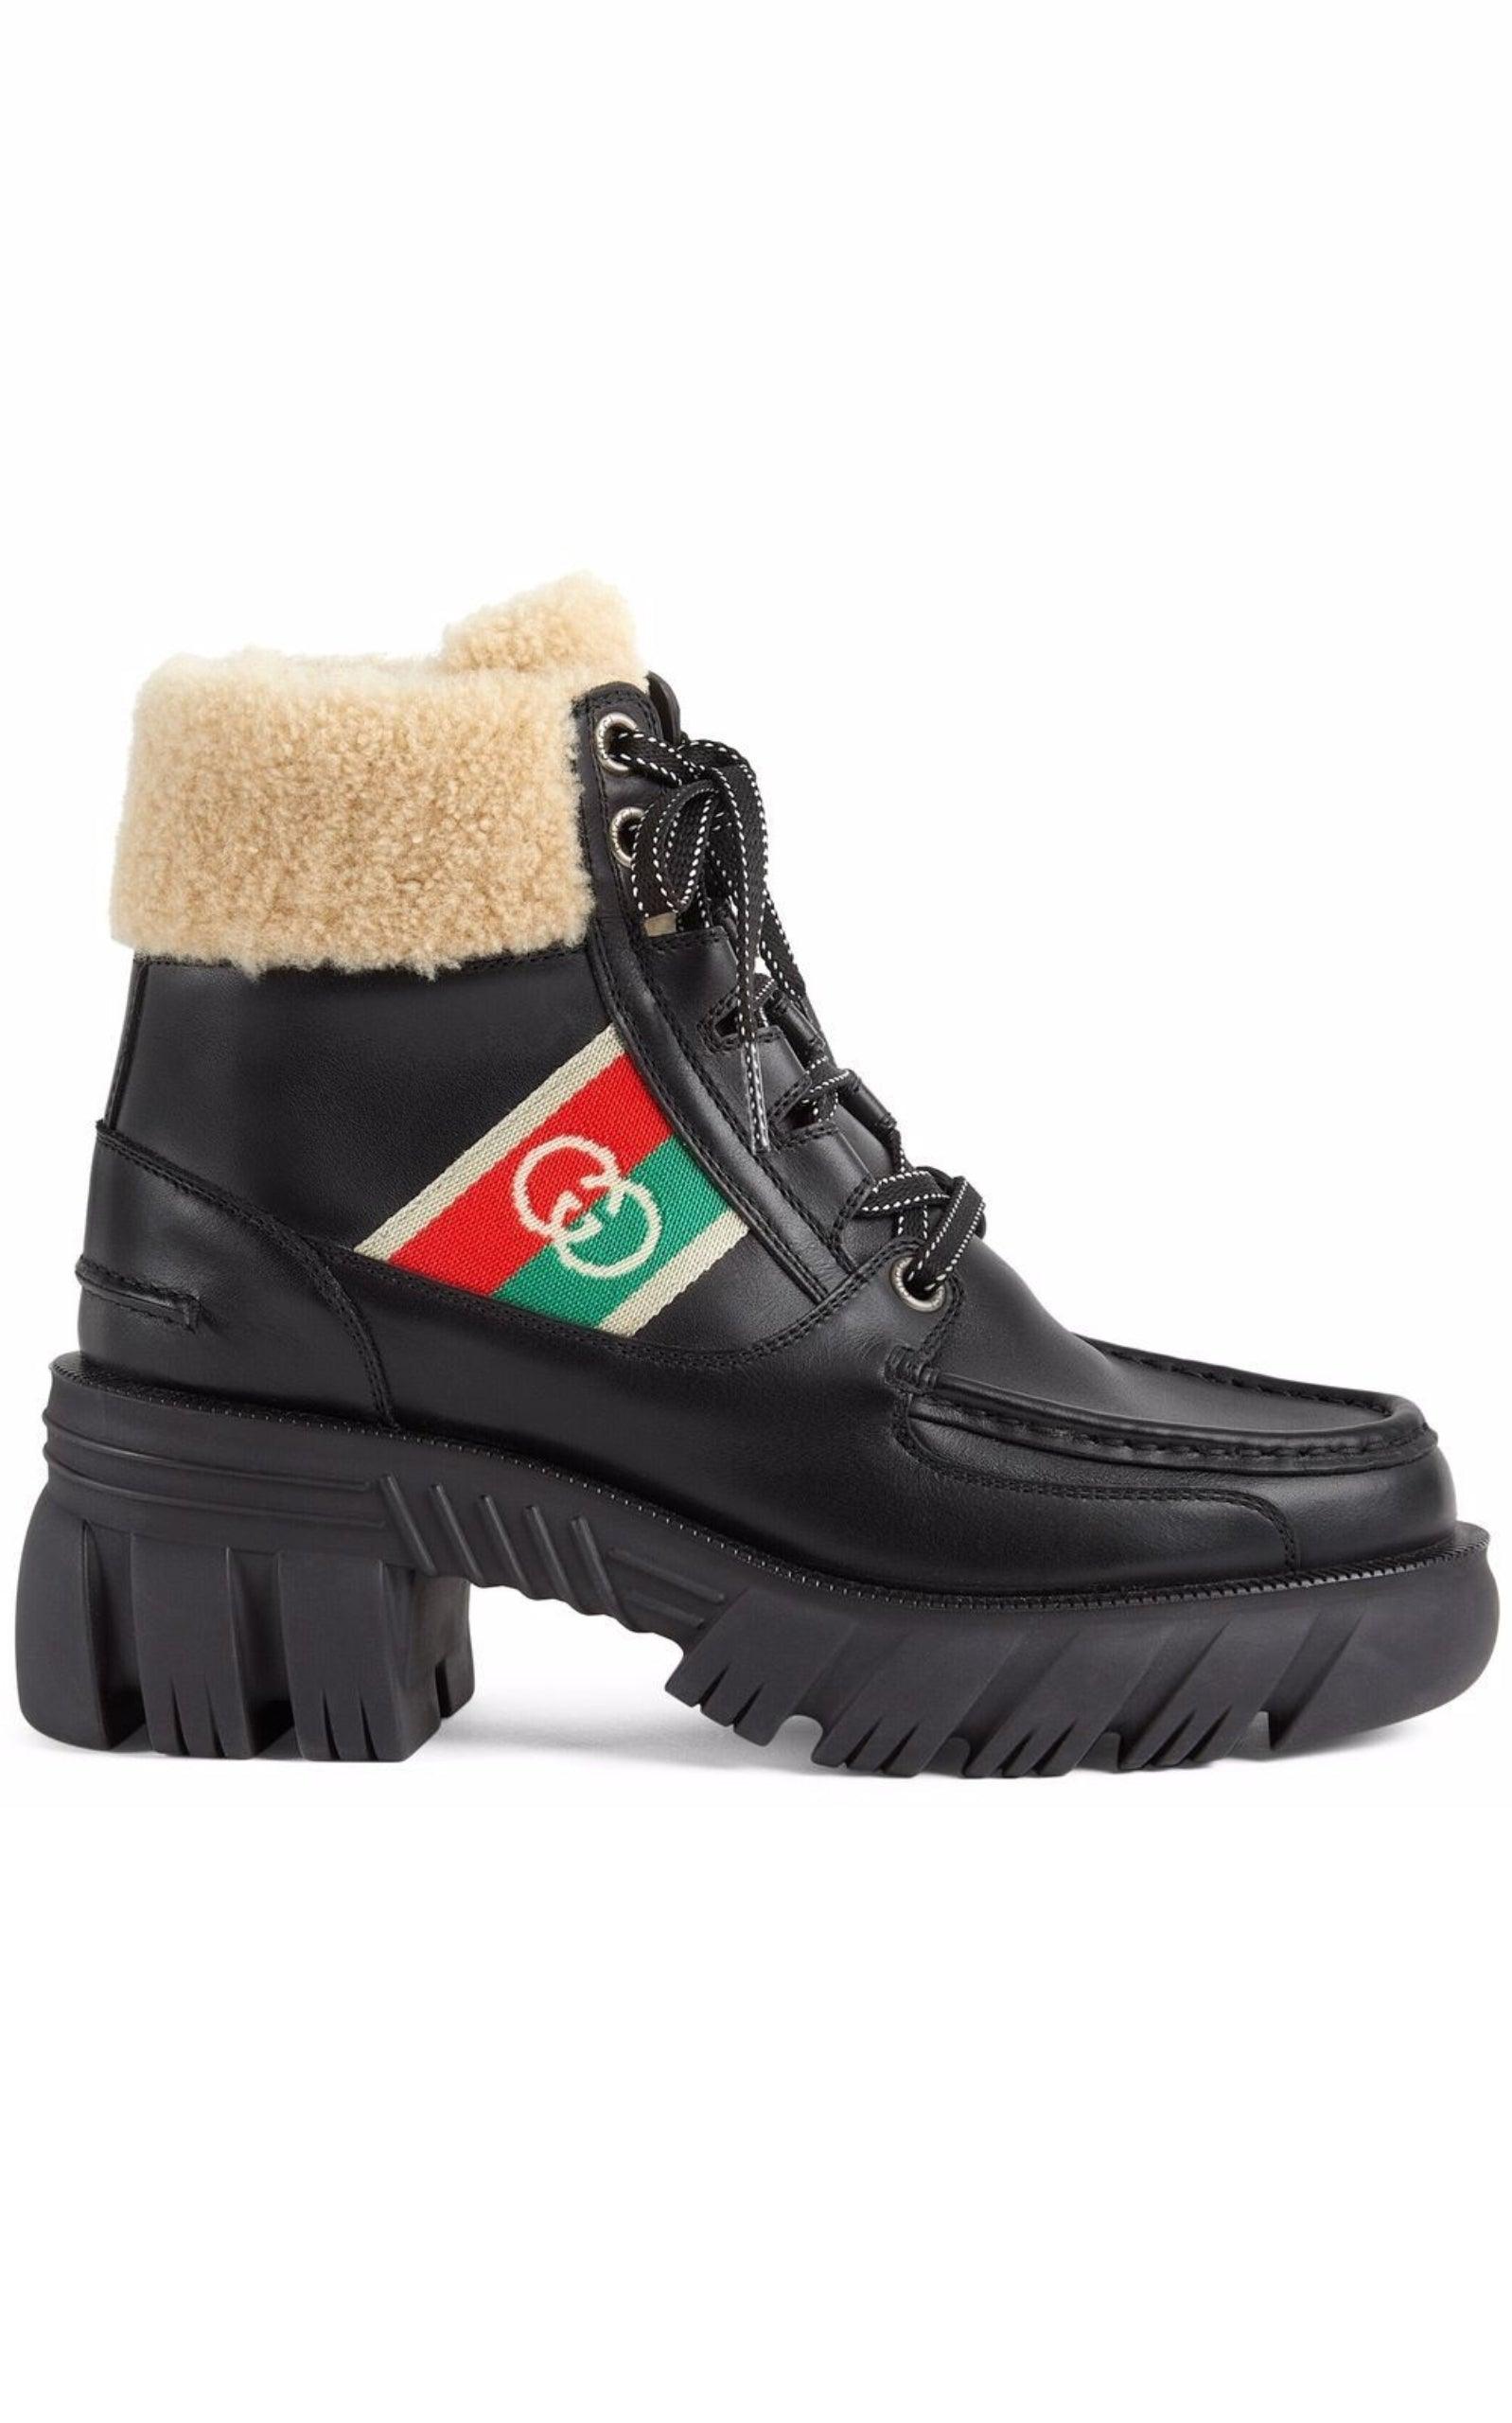 Gucci, Shoes, The North Face X Gucci Leather Boots